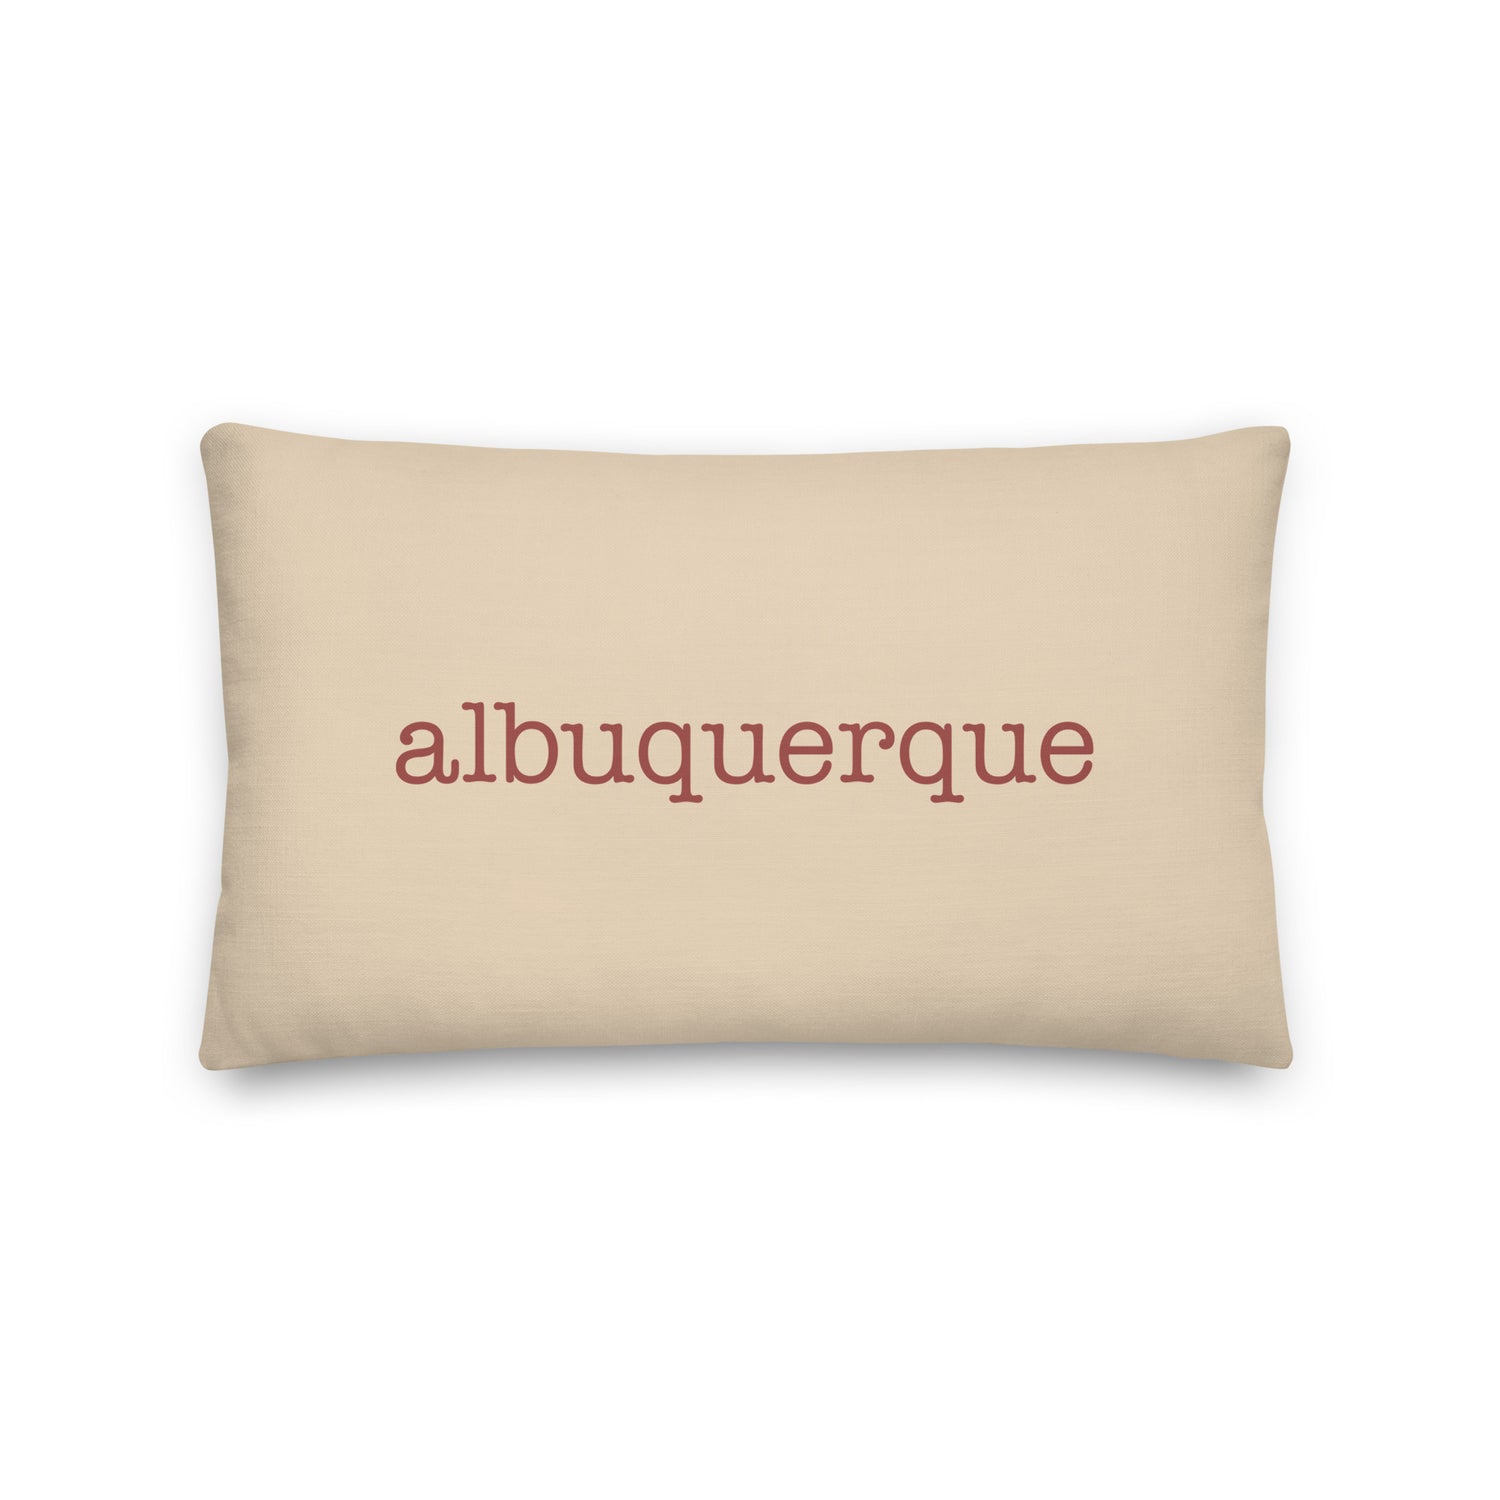 Albuquerque New Mexico Pillows and Blankets • ABQ Airport Code